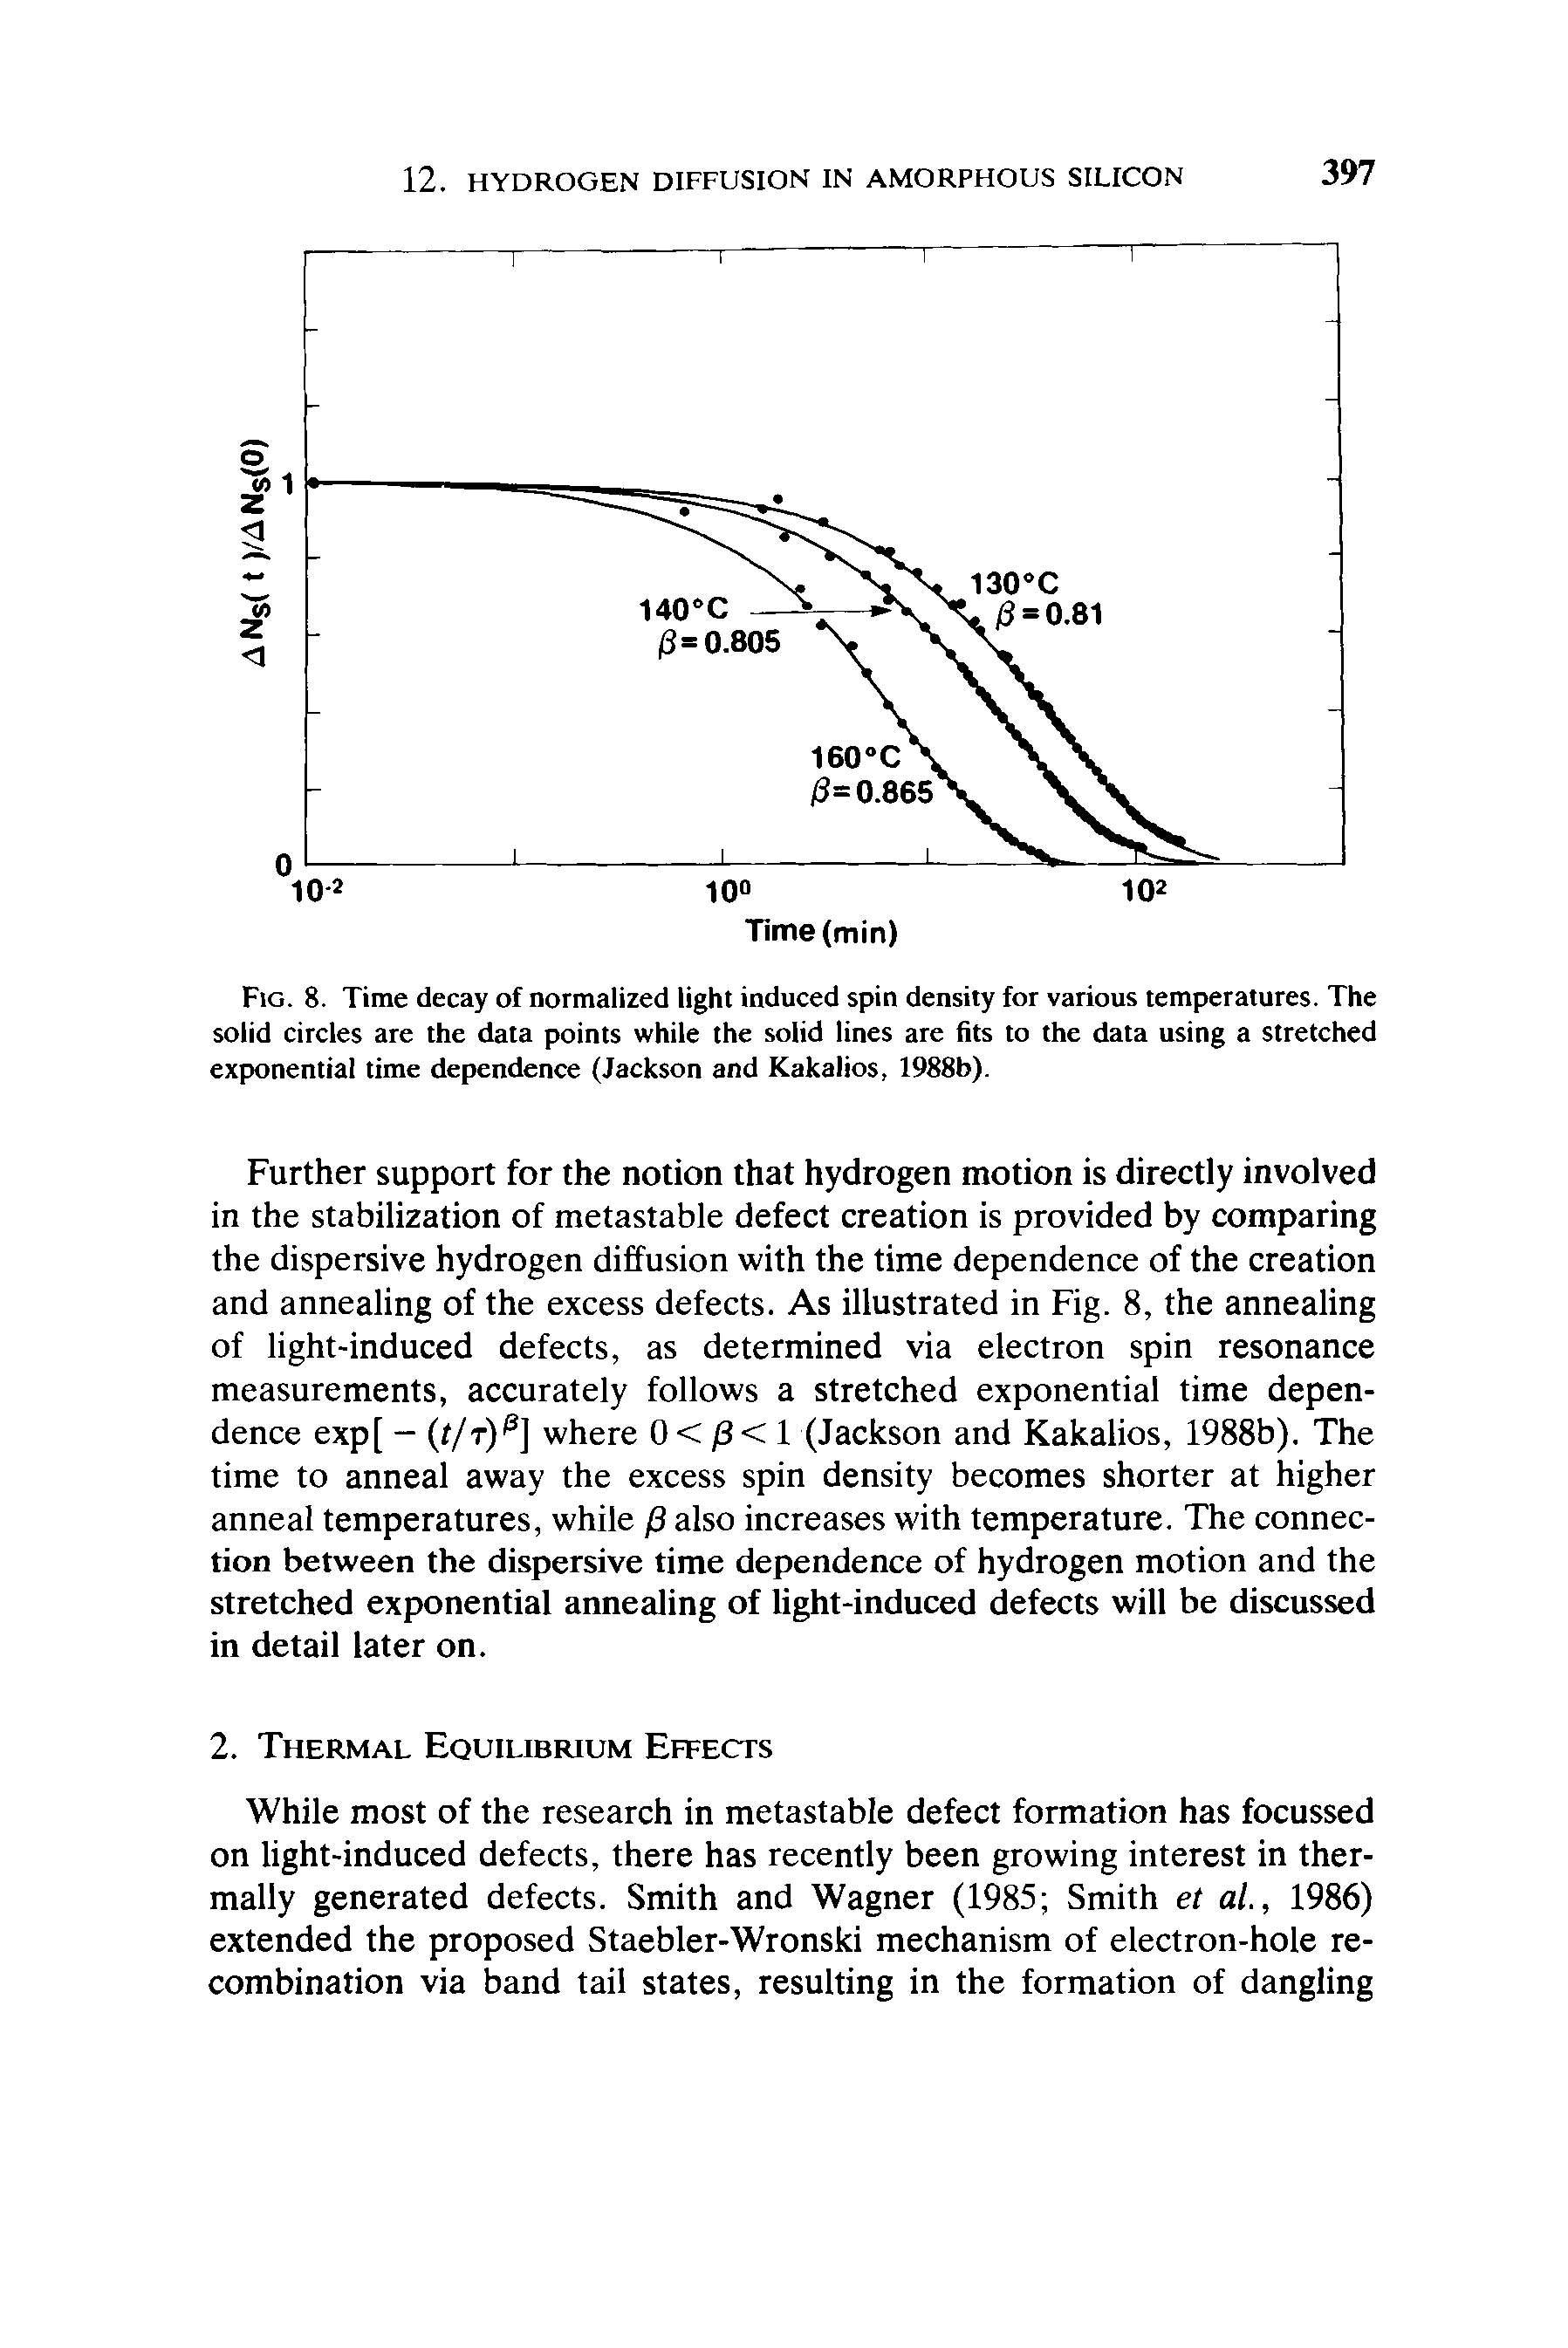 Fig. 8. Time decay of normalized light induced spin density for various temperatures. The solid circles are the data points while the solid lines are fits to the data using a stretched exponential time dependence (Jackson and Kakalios, 1988b).